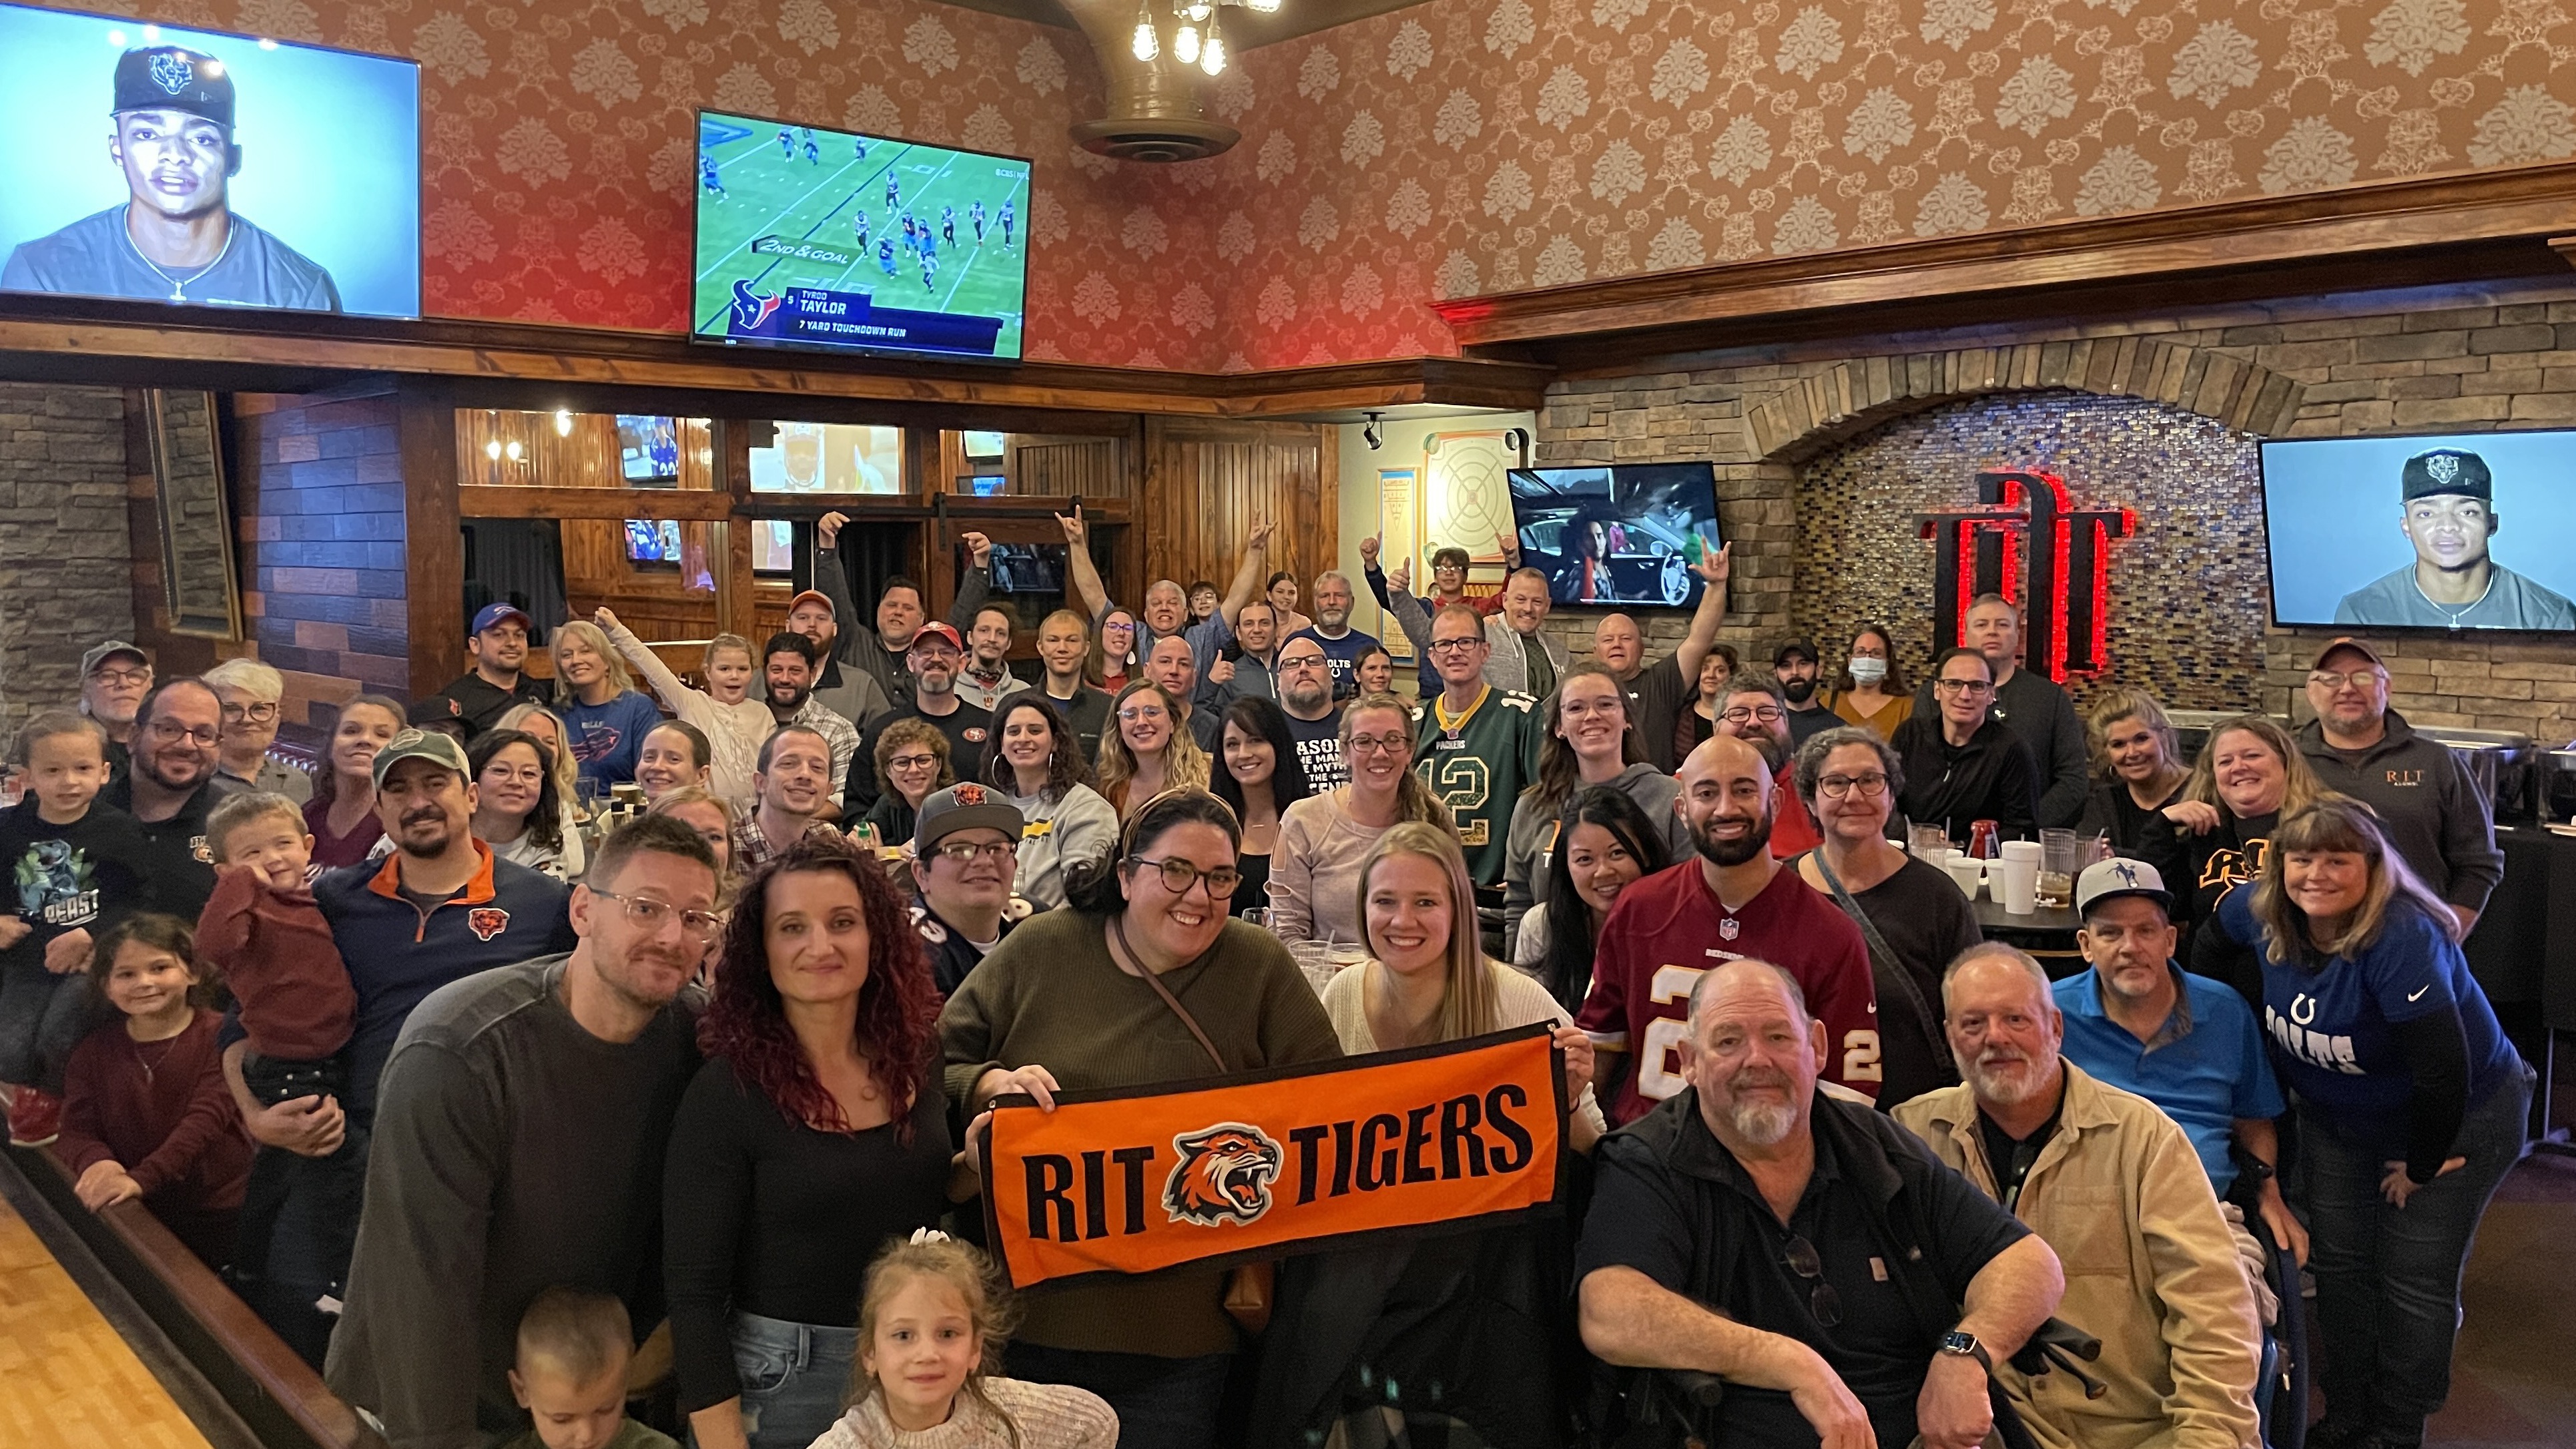 Photo of a large group of people in a sports bar. Two people in front are holding an orange banner that reads "RIT Tigers."